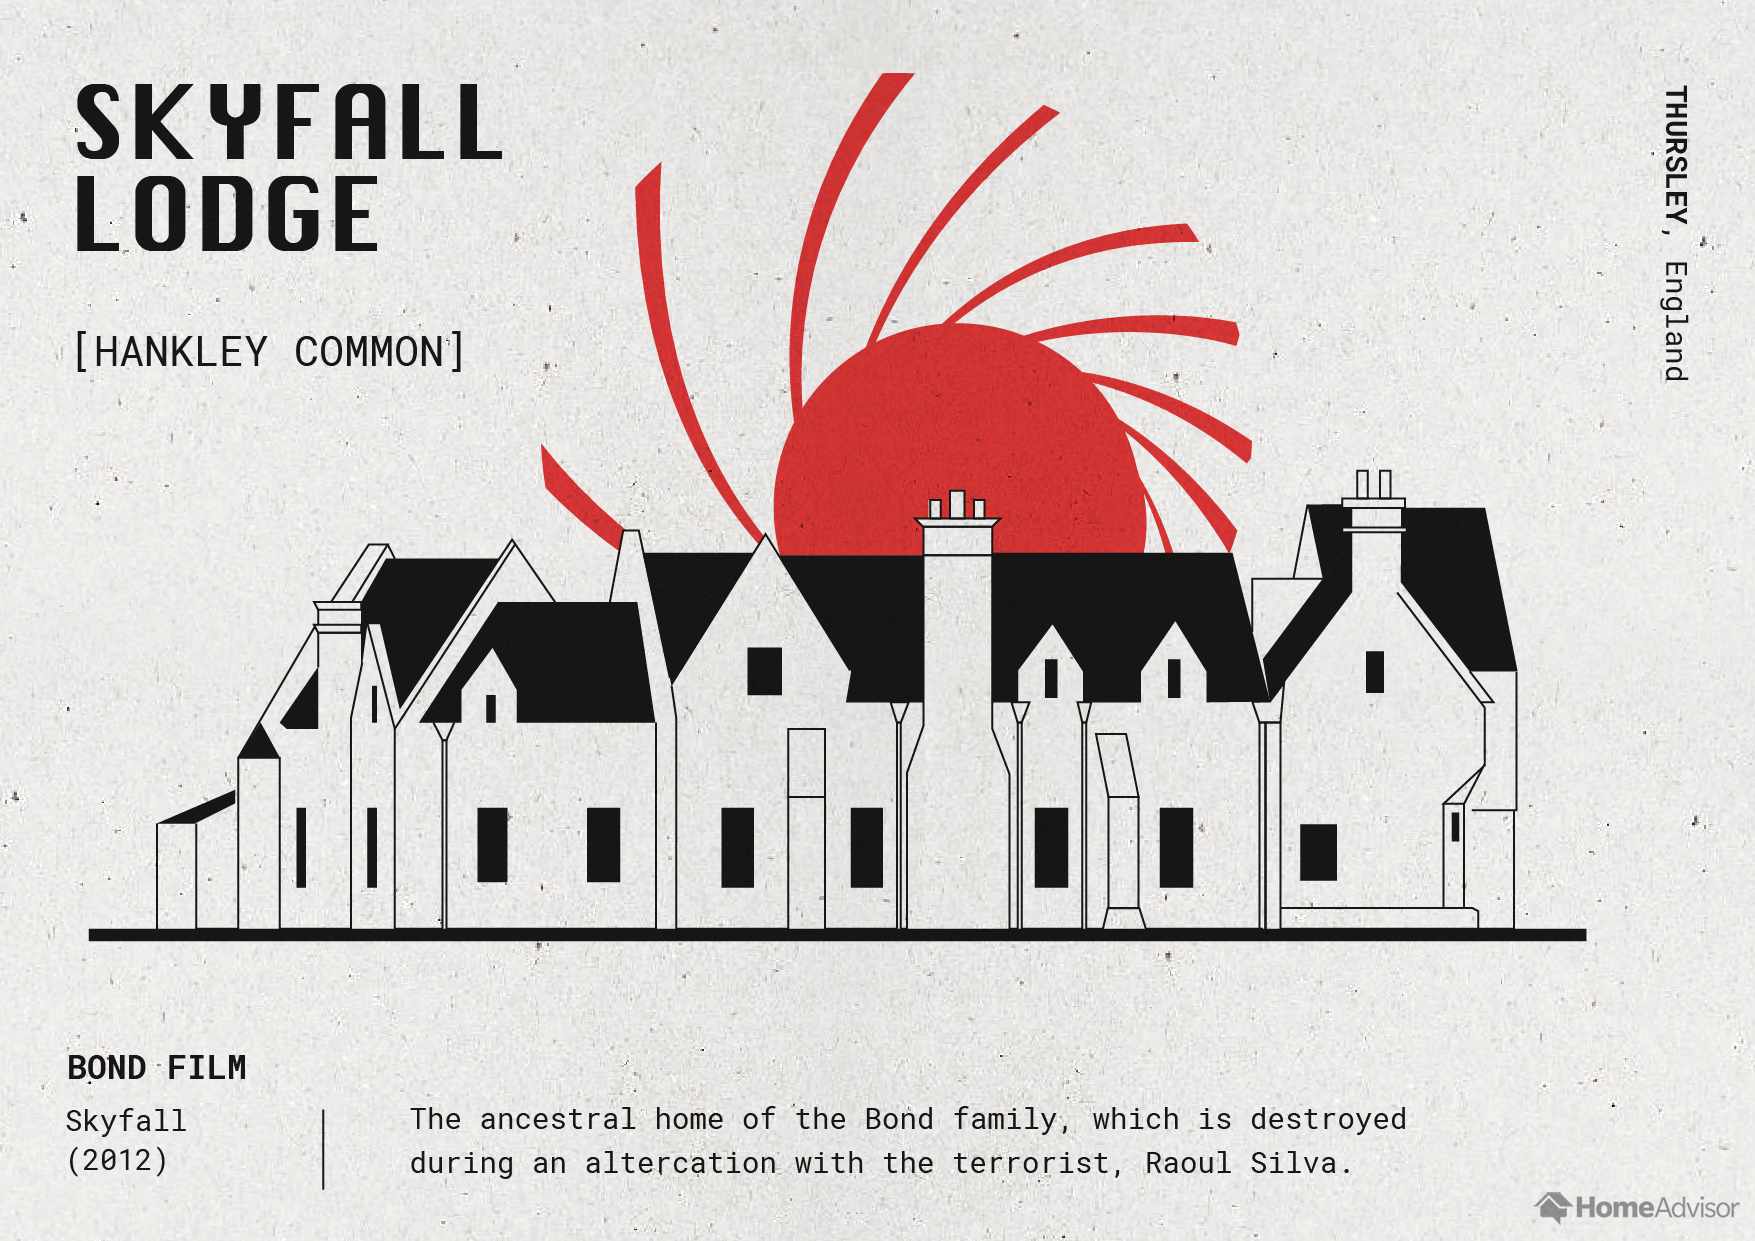 42_The-Architecture-of-James-Bond_Skyfall-Lodge.png